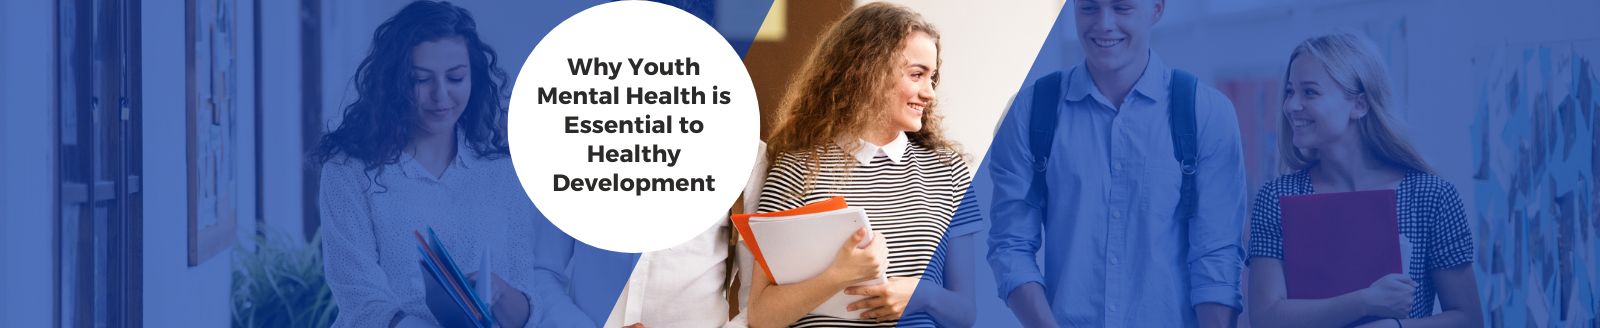 Youth Mental Health banner